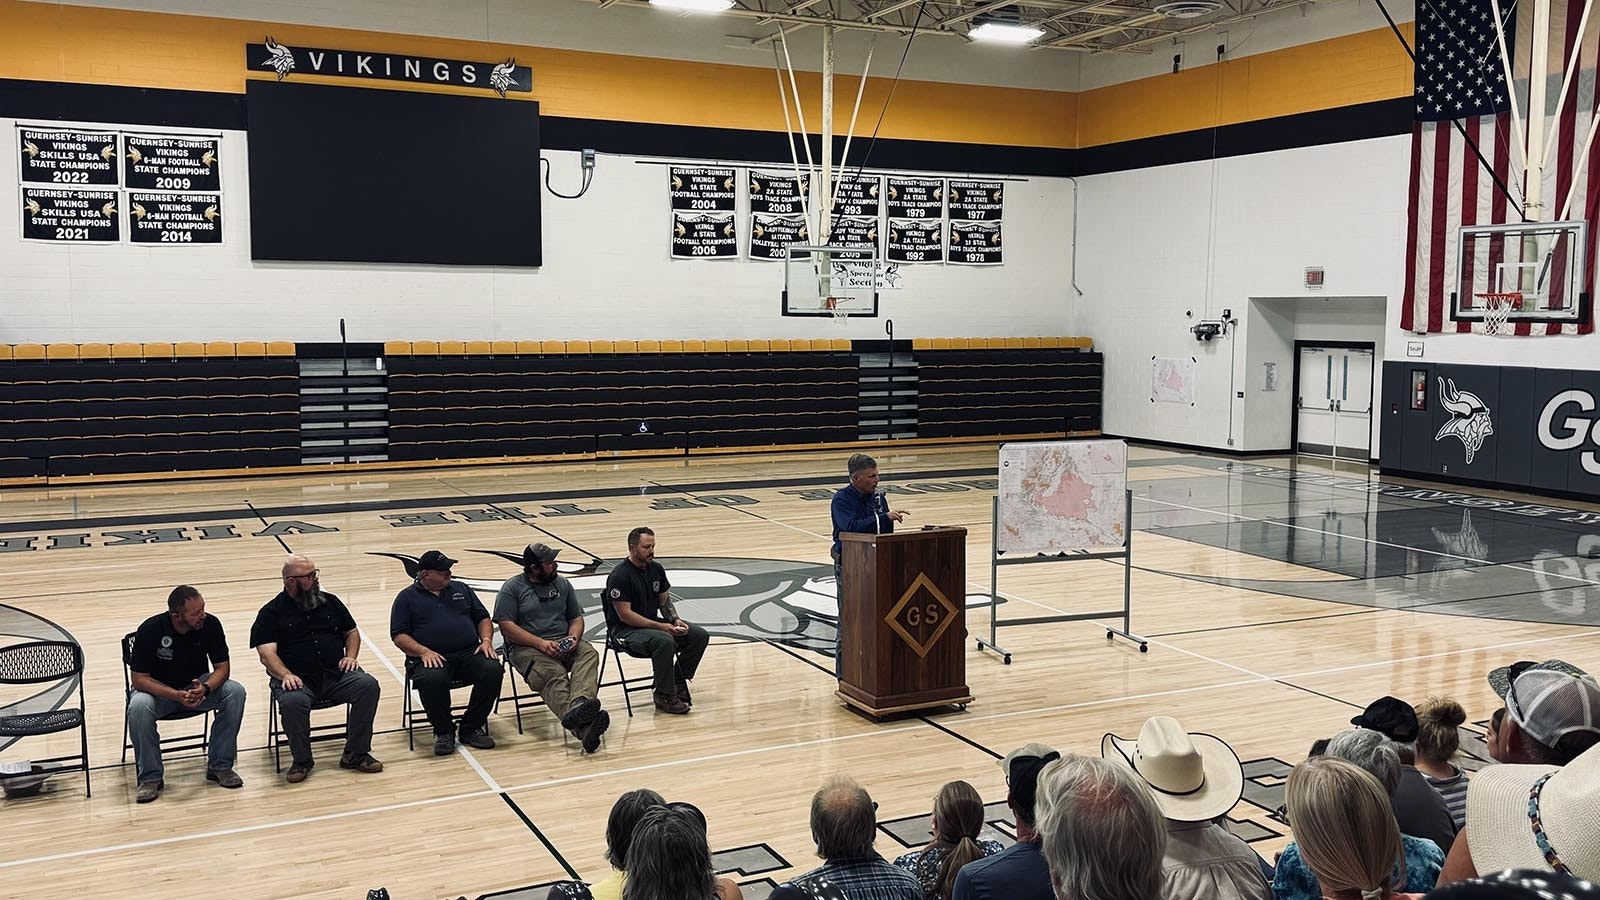 Wyoming Gov. Mark Gordon tells more than 200 people who showed up at the Guernsey-Sunrise High School that more resources are needed to fight wildfires in Wyoming.